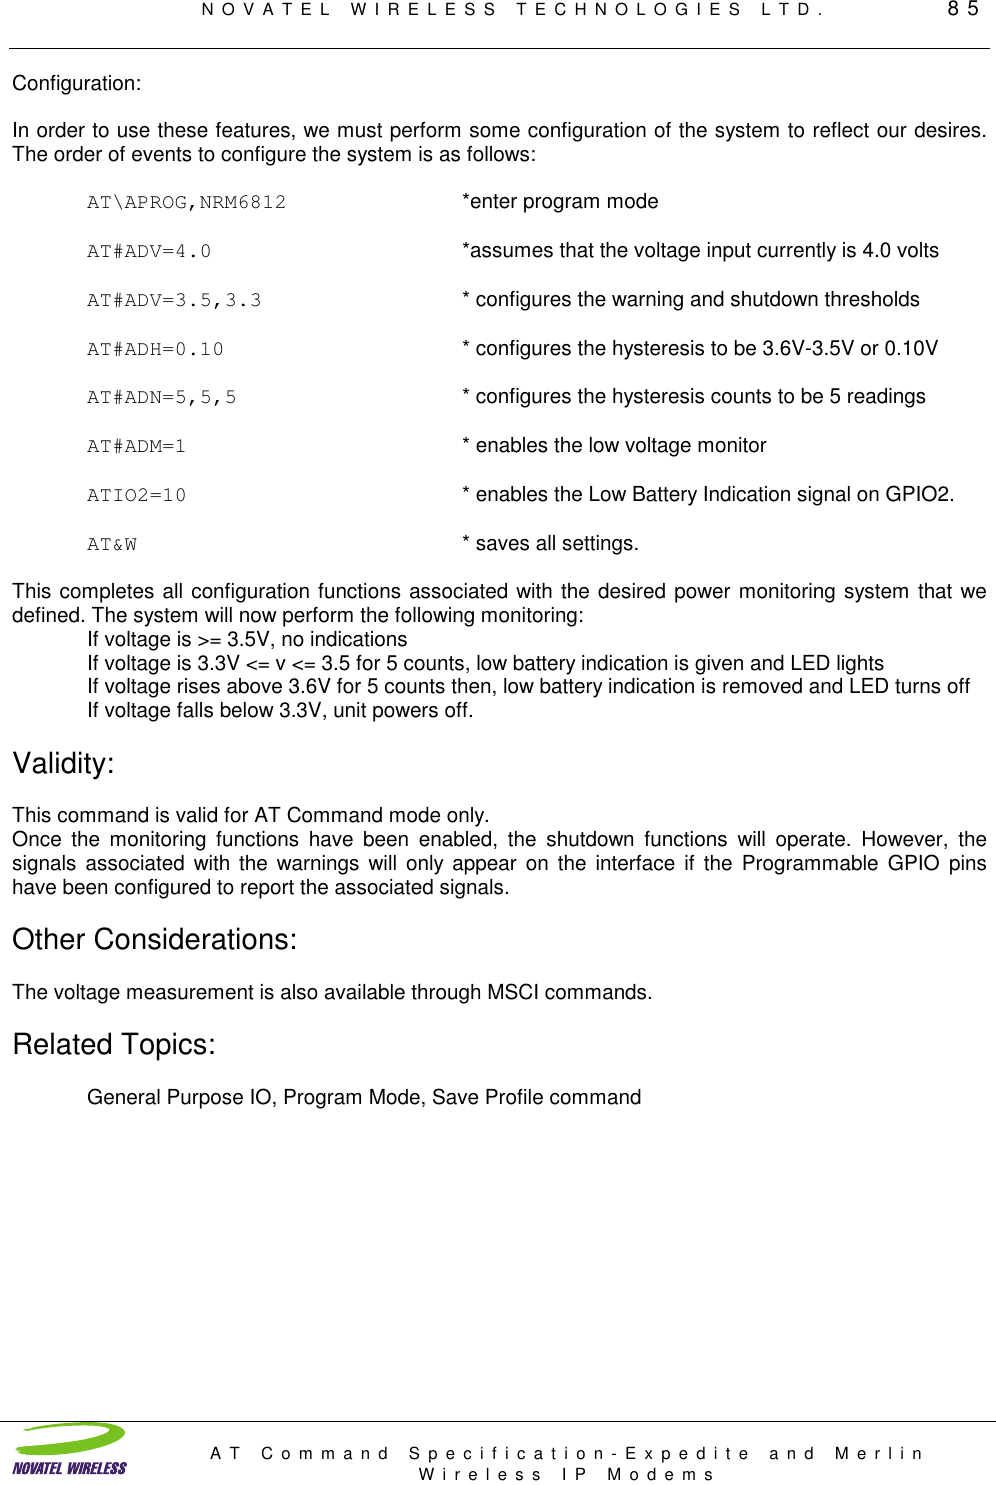 NOVATEL WIRELESS TECHNOLOGIES LTD.         85AT Command Specification-Expedite and MerlinWireless IP ModemsConfiguration:In order to use these features, we must perform some configuration of the system to reflect our desires.The order of events to configure the system is as follows:AT\APROG,NRM6812 *enter program modeAT#ADV=4.0 *assumes that the voltage input currently is 4.0 voltsAT#ADV=3.5,3.3 * configures the warning and shutdown thresholdsAT#ADH=0.10 * configures the hysteresis to be 3.6V-3.5V or 0.10VAT#ADN=5,5,5 * configures the hysteresis counts to be 5 readingsAT#ADM=1 * enables the low voltage monitorATIO2=10 * enables the Low Battery Indication signal on GPIO2.AT&amp;W * saves all settings.This completes all configuration functions associated with the desired power monitoring system that wedefined. The system will now perform the following monitoring:If voltage is &gt;= 3.5V, no indicationsIf voltage is 3.3V &lt;= v &lt;= 3.5 for 5 counts, low battery indication is given and LED lightsIf voltage rises above 3.6V for 5 counts then, low battery indication is removed and LED turns offIf voltage falls below 3.3V, unit powers off.Validity:This command is valid for AT Command mode only.Once the monitoring functions have been enabled, the shutdown functions will operate. However, thesignals associated with the warnings will only appear on the interface if the Programmable GPIO pinshave been configured to report the associated signals.Other Considerations:The voltage measurement is also available through MSCI commands.Related Topics:General Purpose IO, Program Mode, Save Profile command